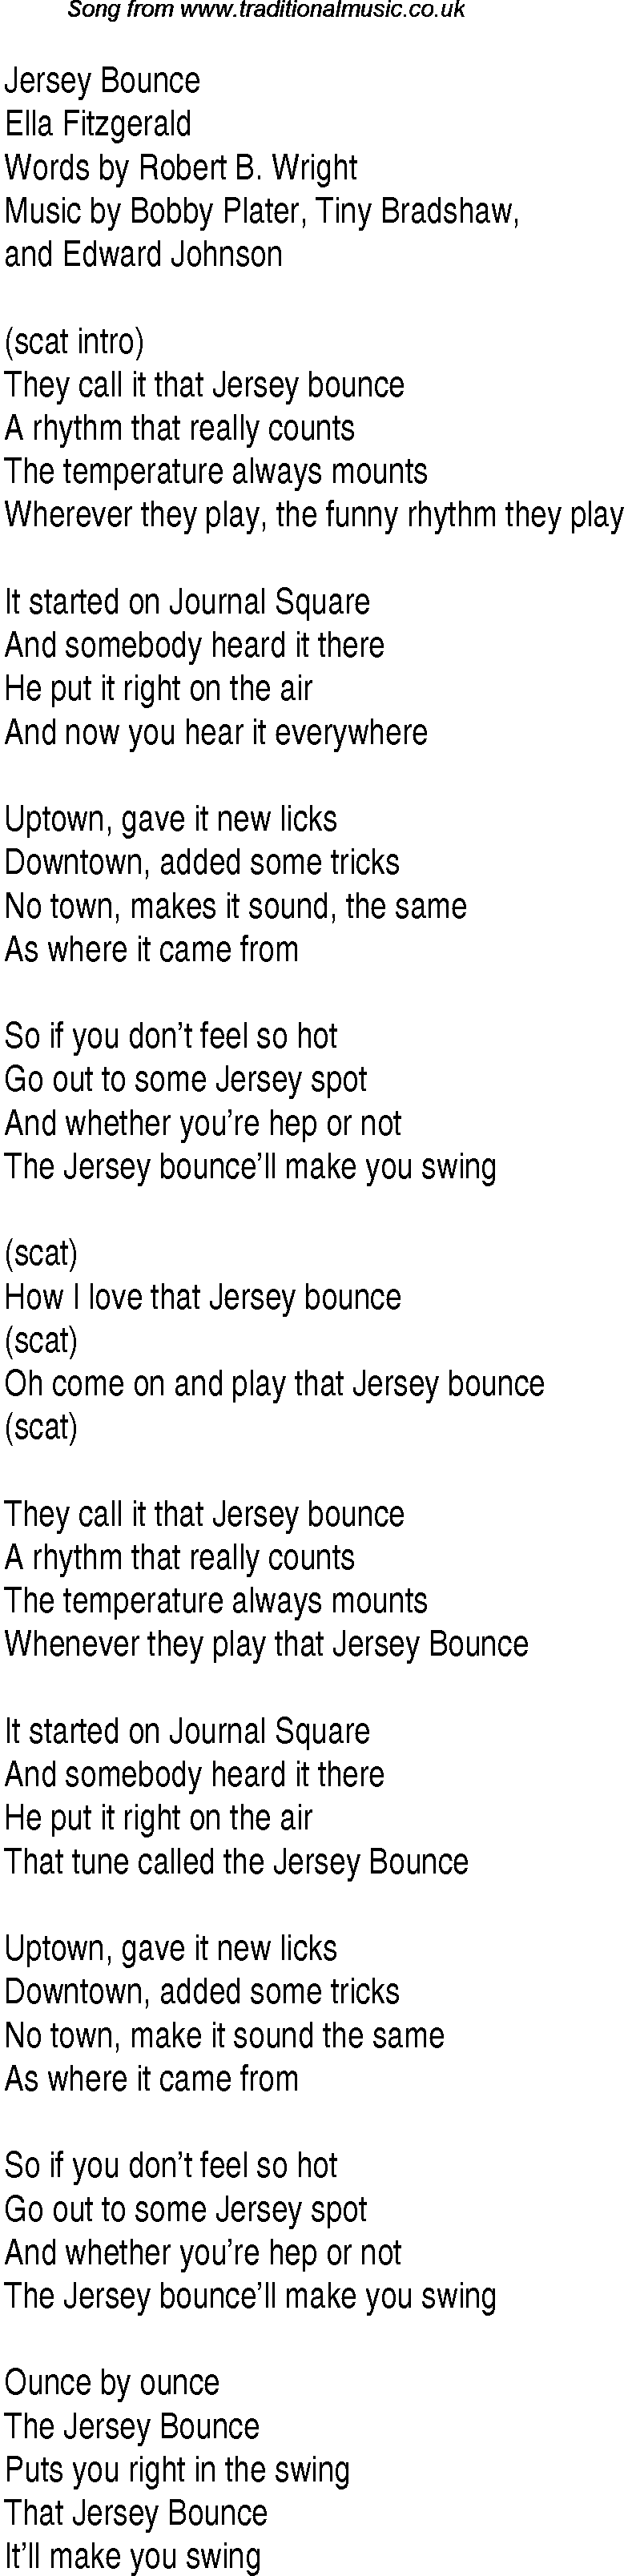 Music charts top songs 1942 - lyrics for Jersey Bounce